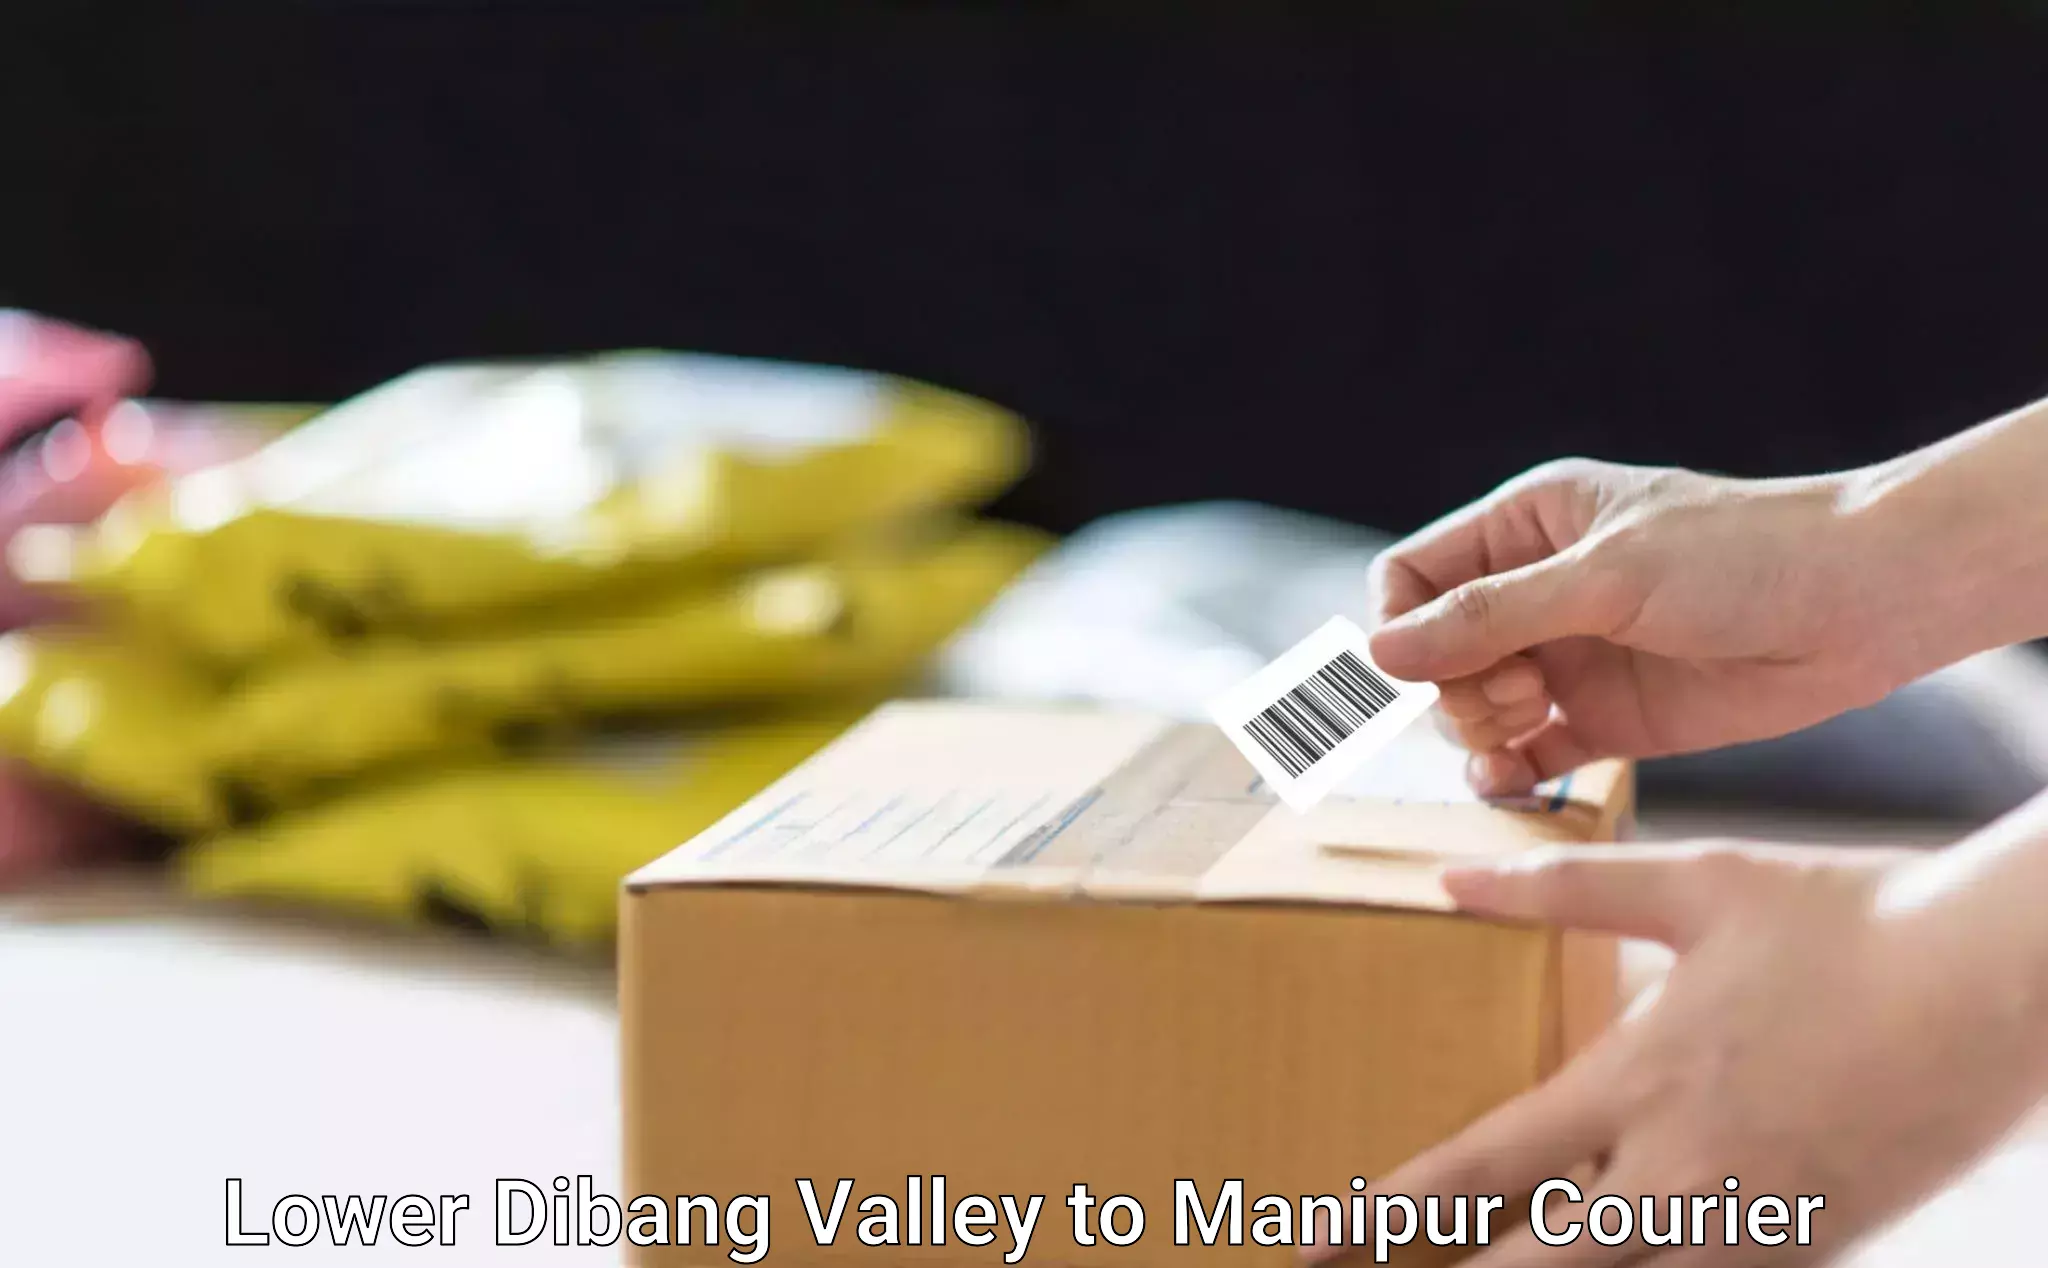 Courier service partnerships in Lower Dibang Valley to Manipur